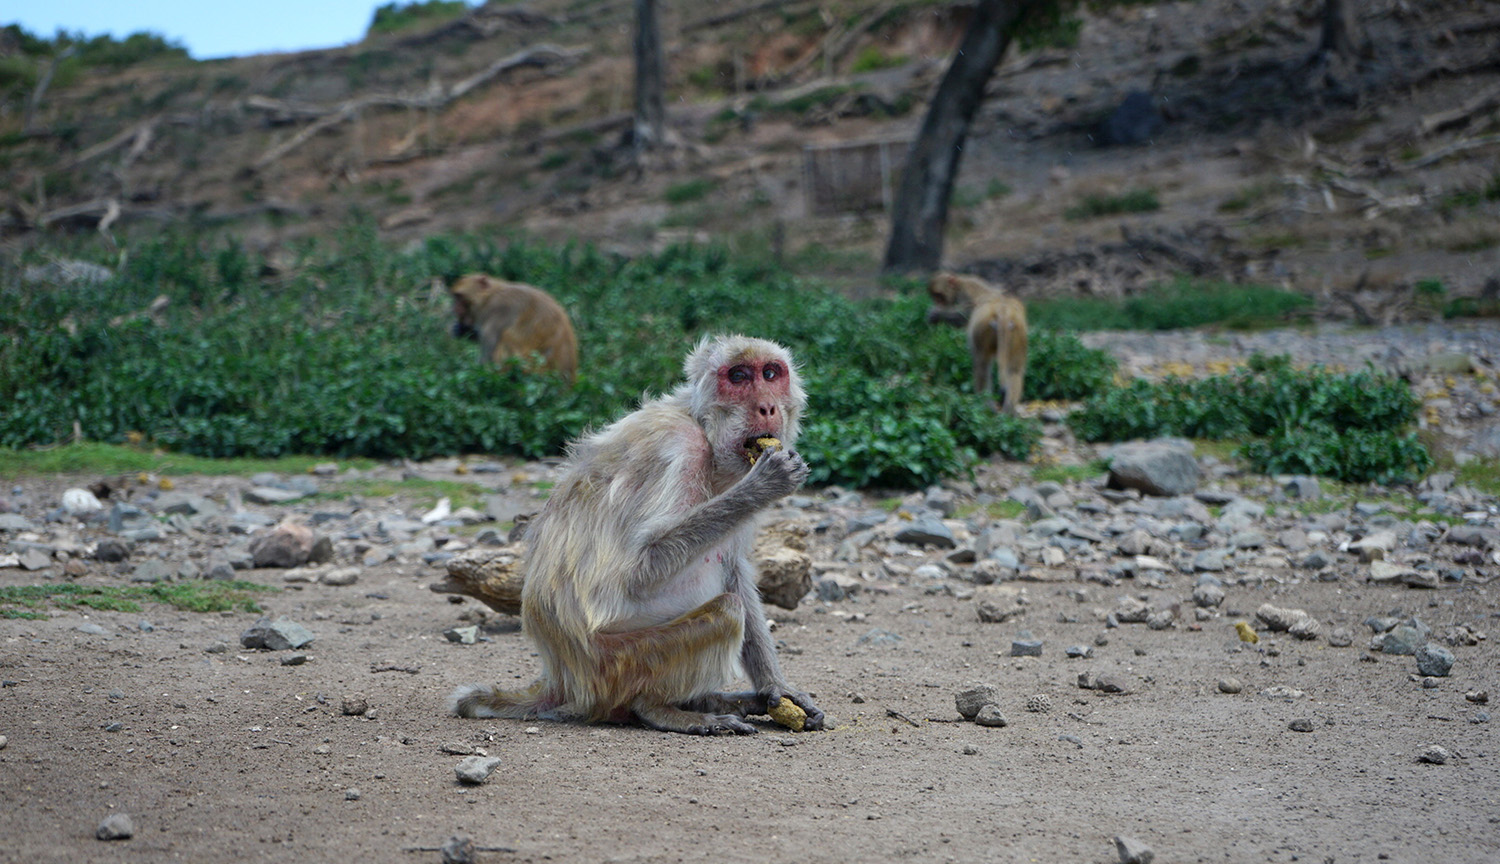 Photo of an old rhesus macaque putting something on her mouth. She sits on what looks like a beach or bare ground. Vegetation is behind her.